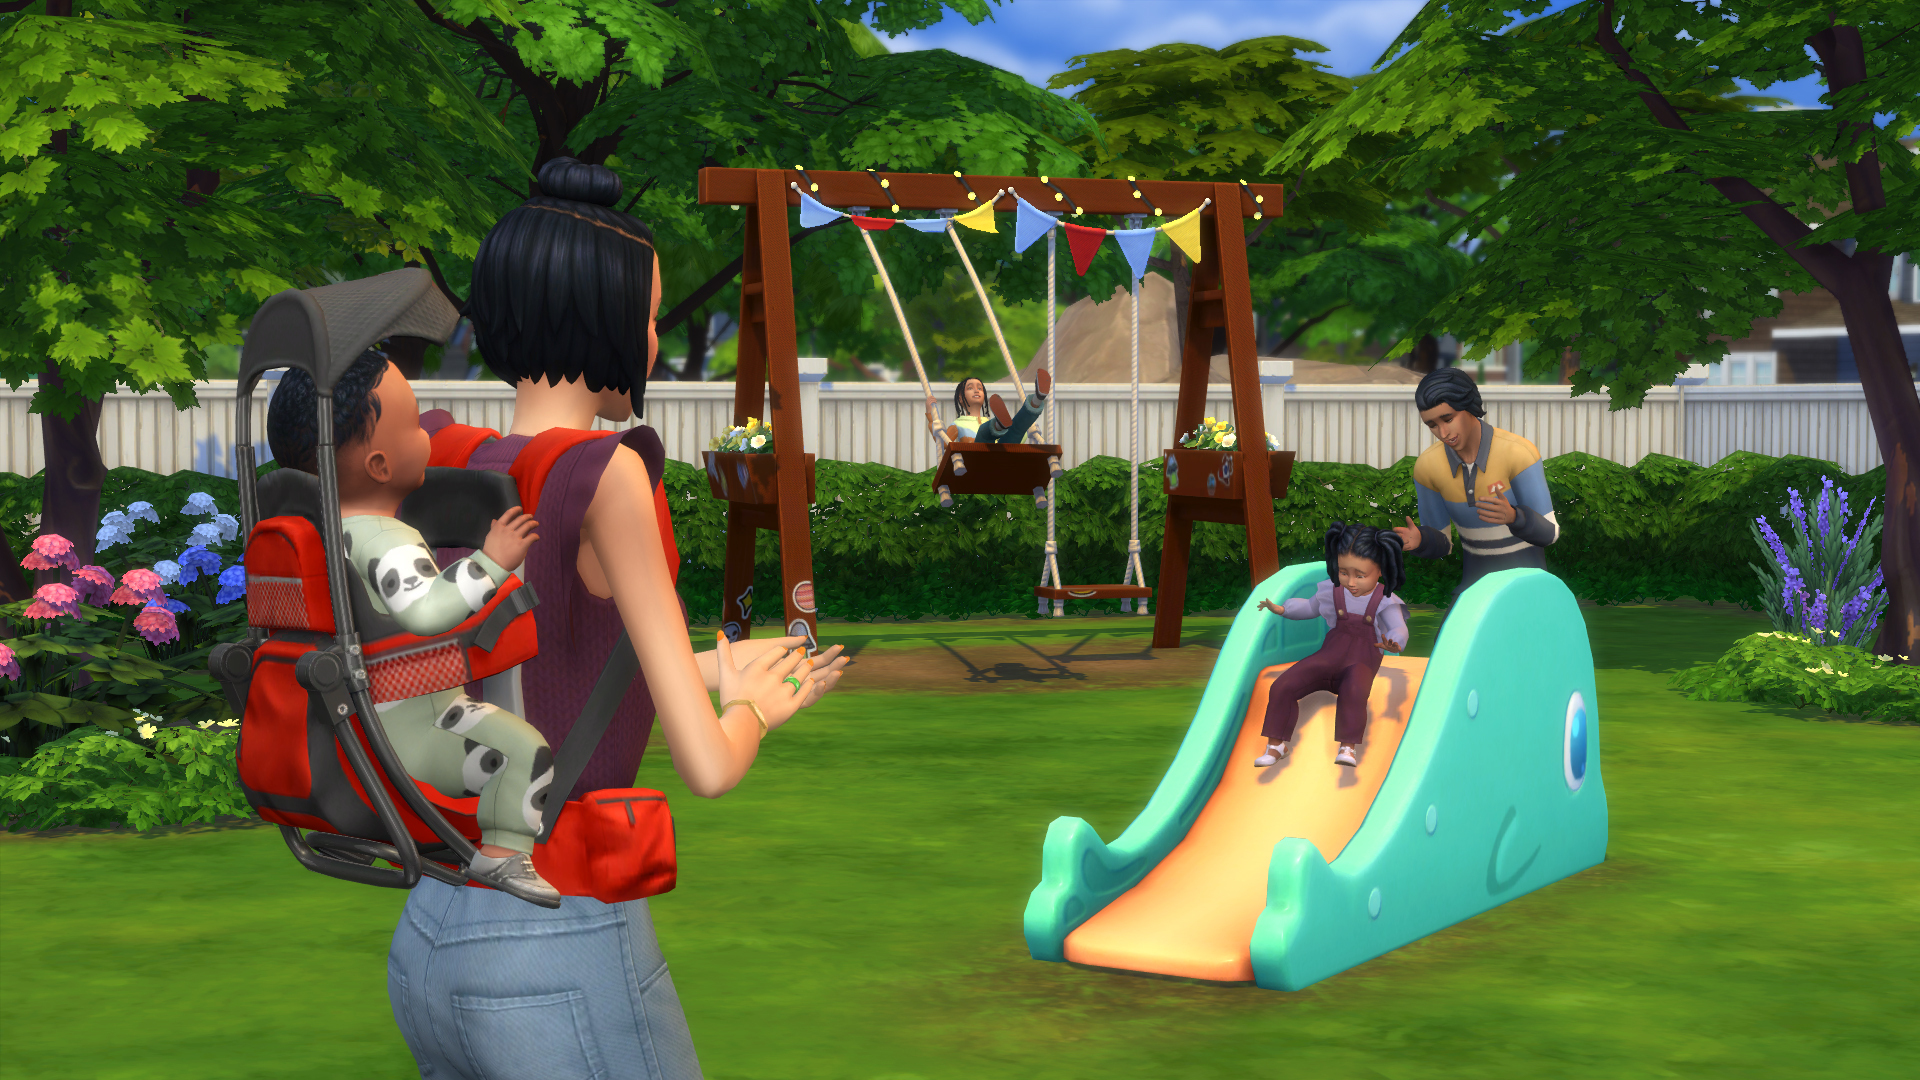 FAMILY MATTERS IN THE SIMS 4 GROWING TOGETHER EXPANSION PACK